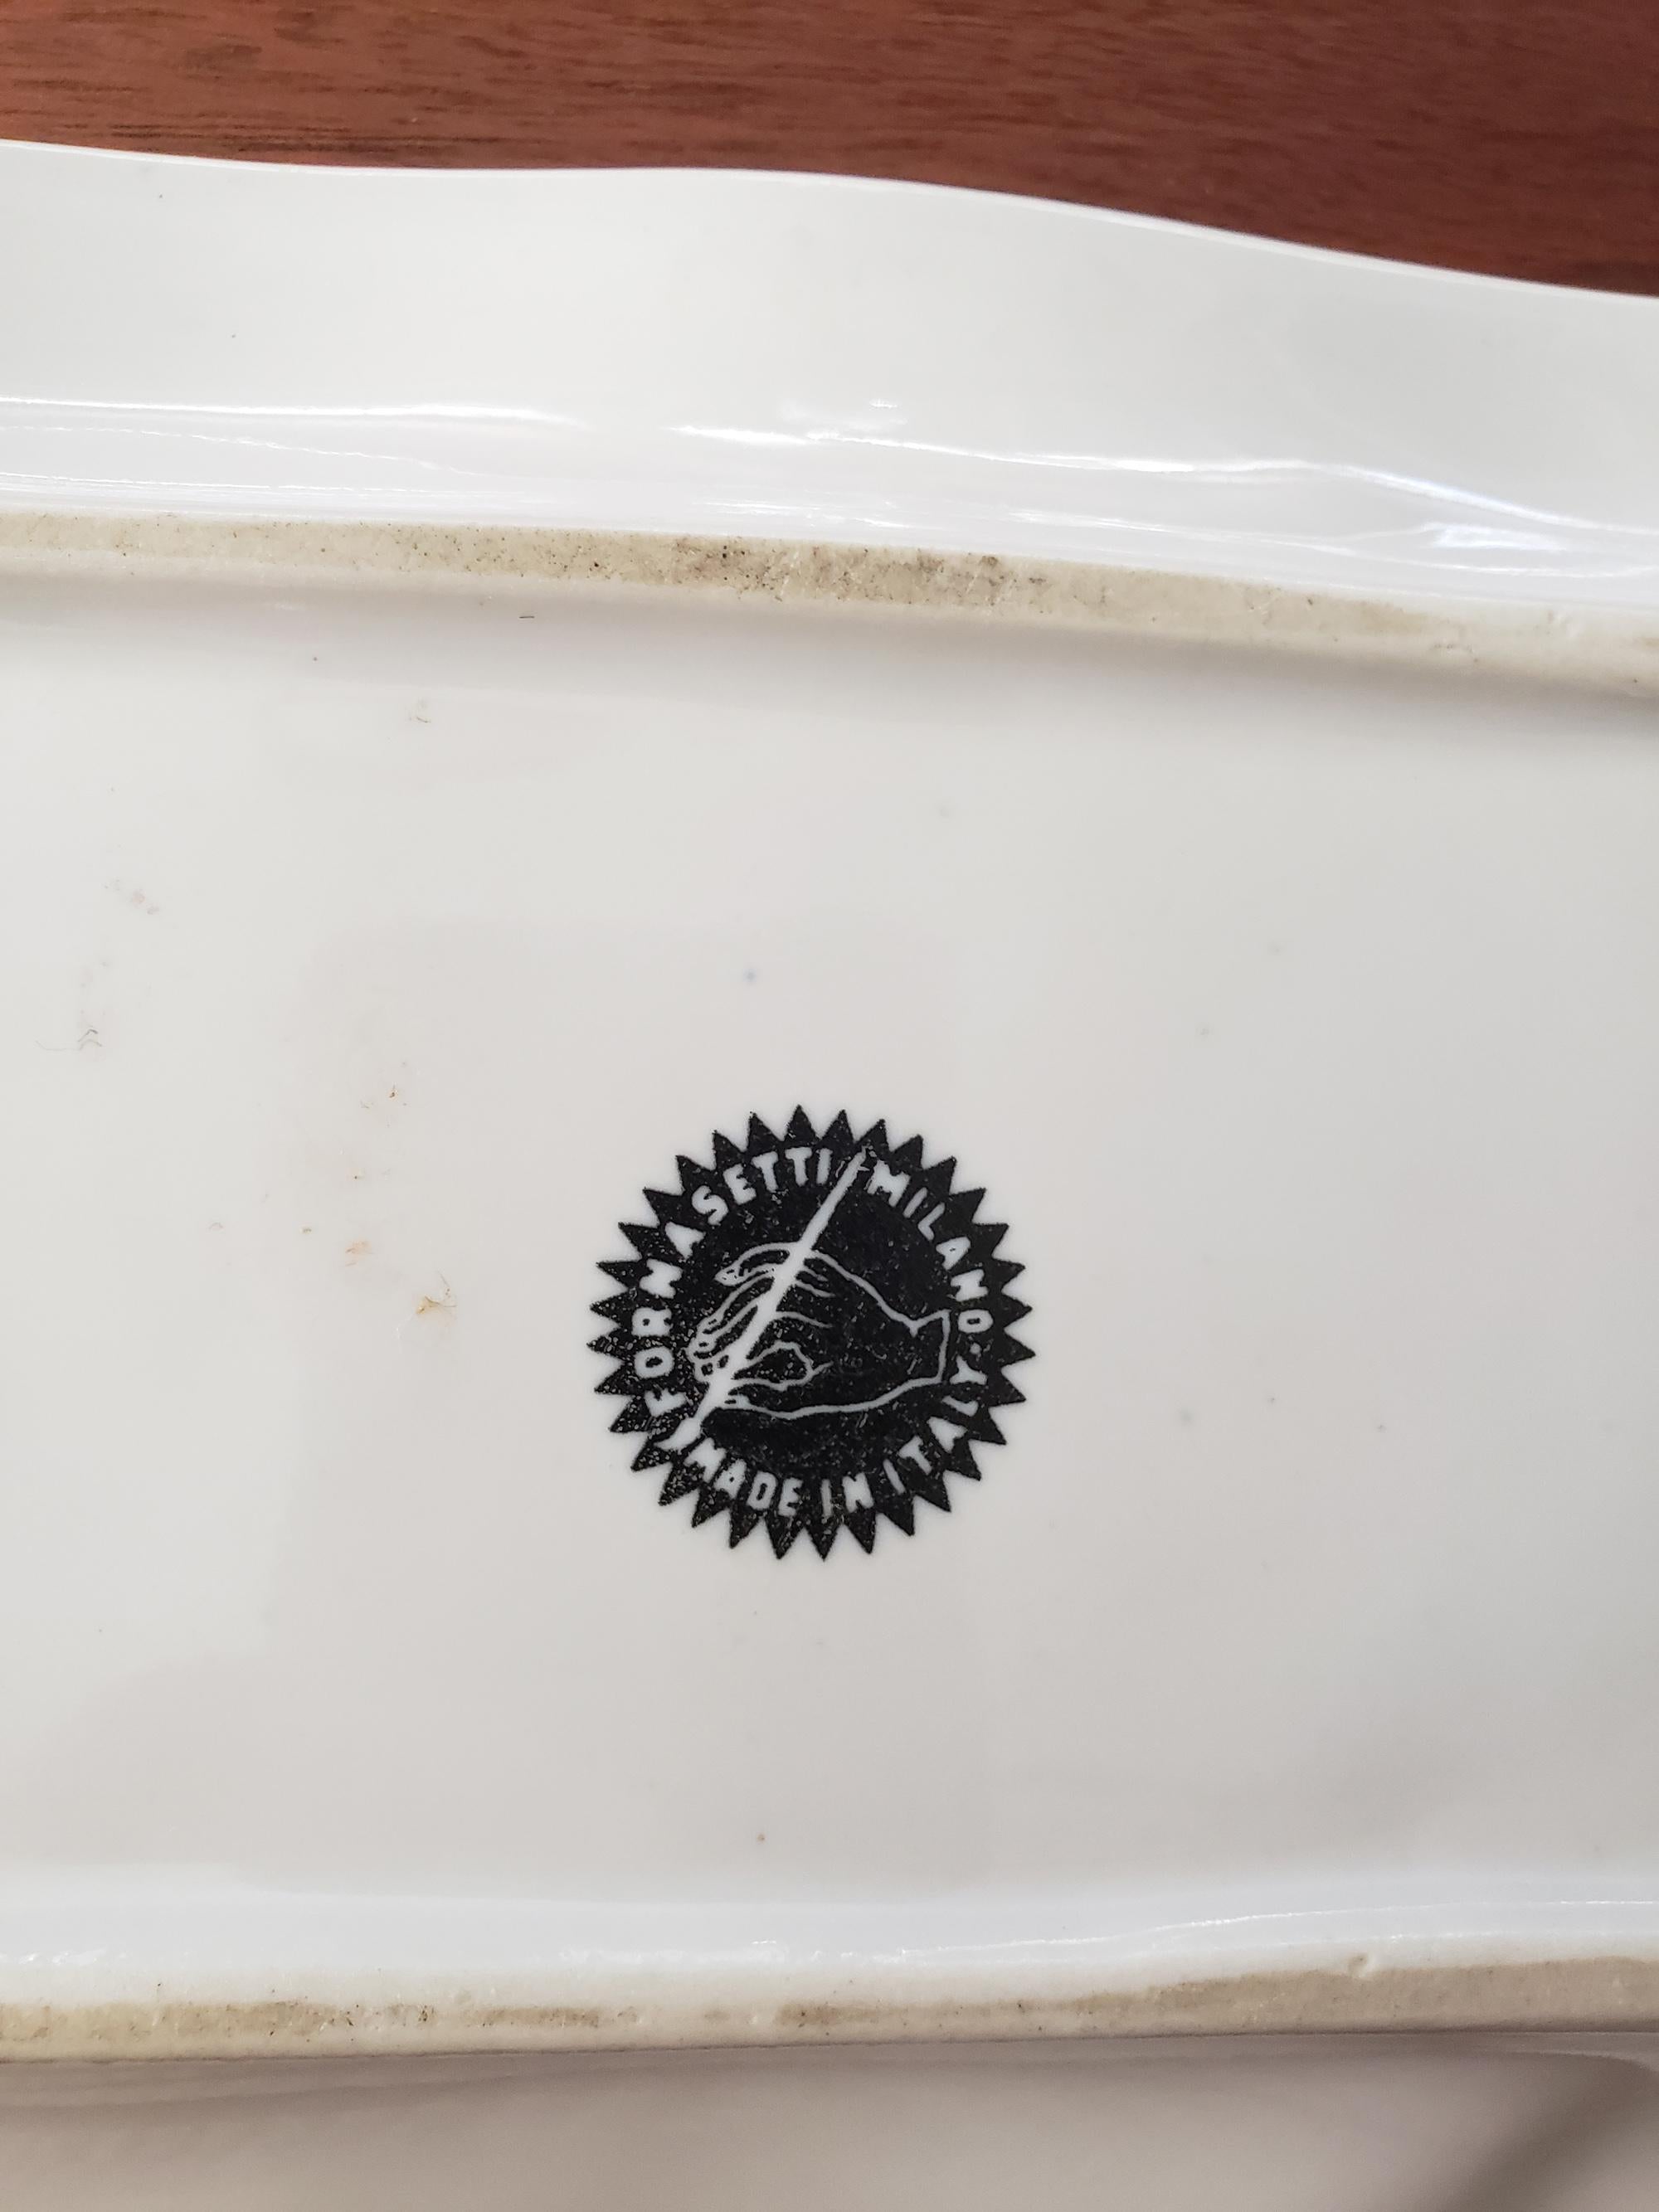 Piero Fornasetti ceramic bill of sale tray,
Weikel & Smith Spice Company, Philadelphia
The 1950s-1960s

The large ceramic tray or ashtray depicts a bill of sale from the Weikel & Smith Spice Company, Philadelphia. The purchase depicted includes